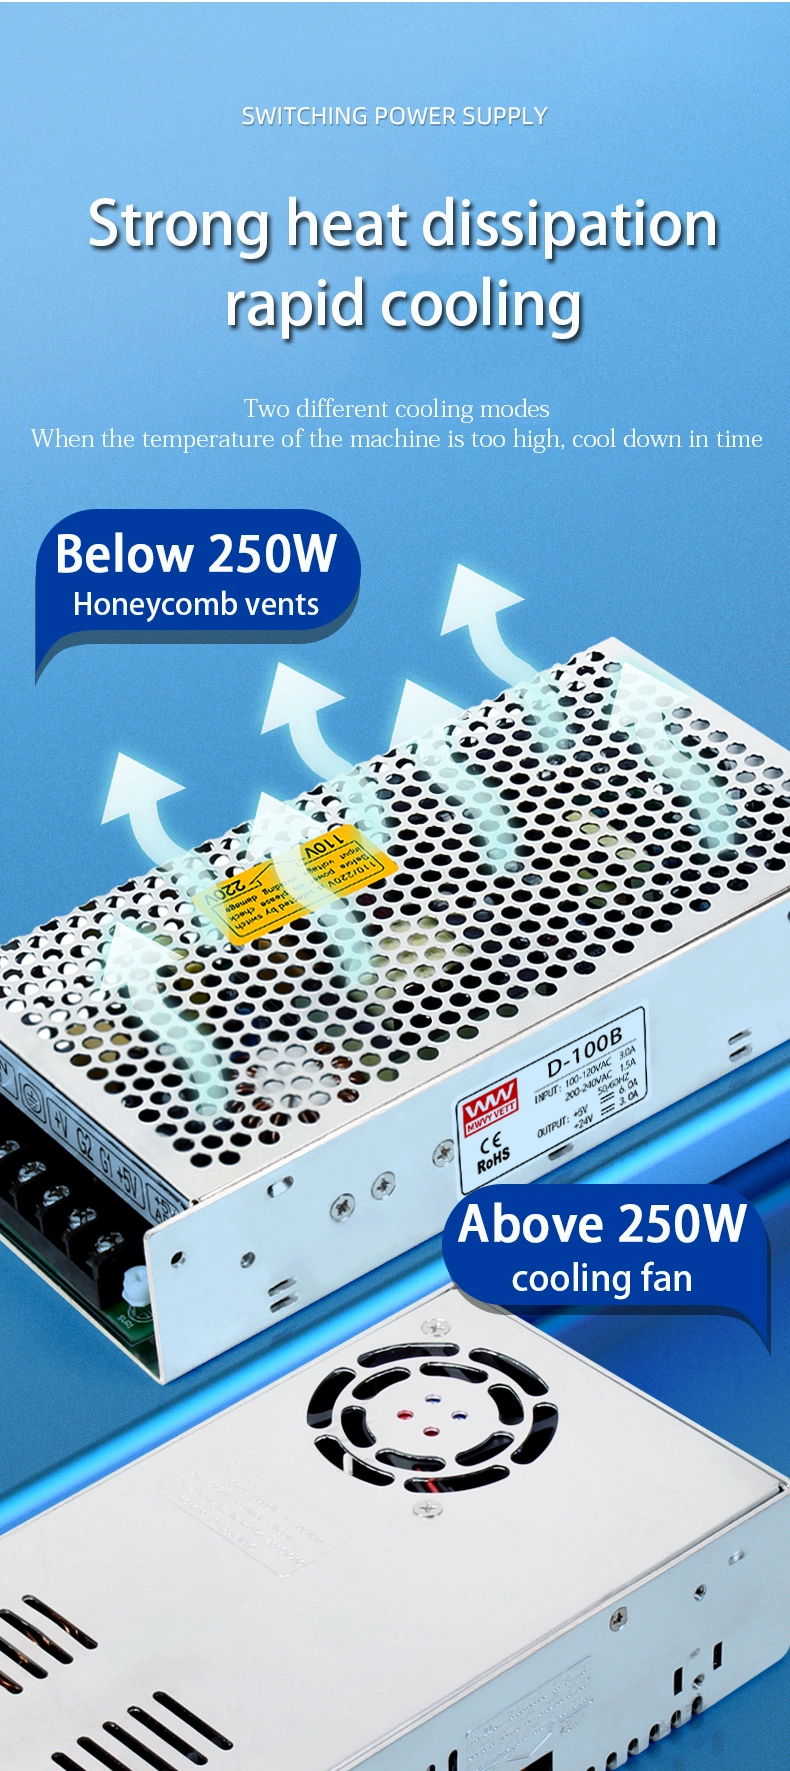 D-360b 5V 10A 24V 10A Industrial Power Supply SMPS DC Power Supply AC to DC Output 18V2a SMPS